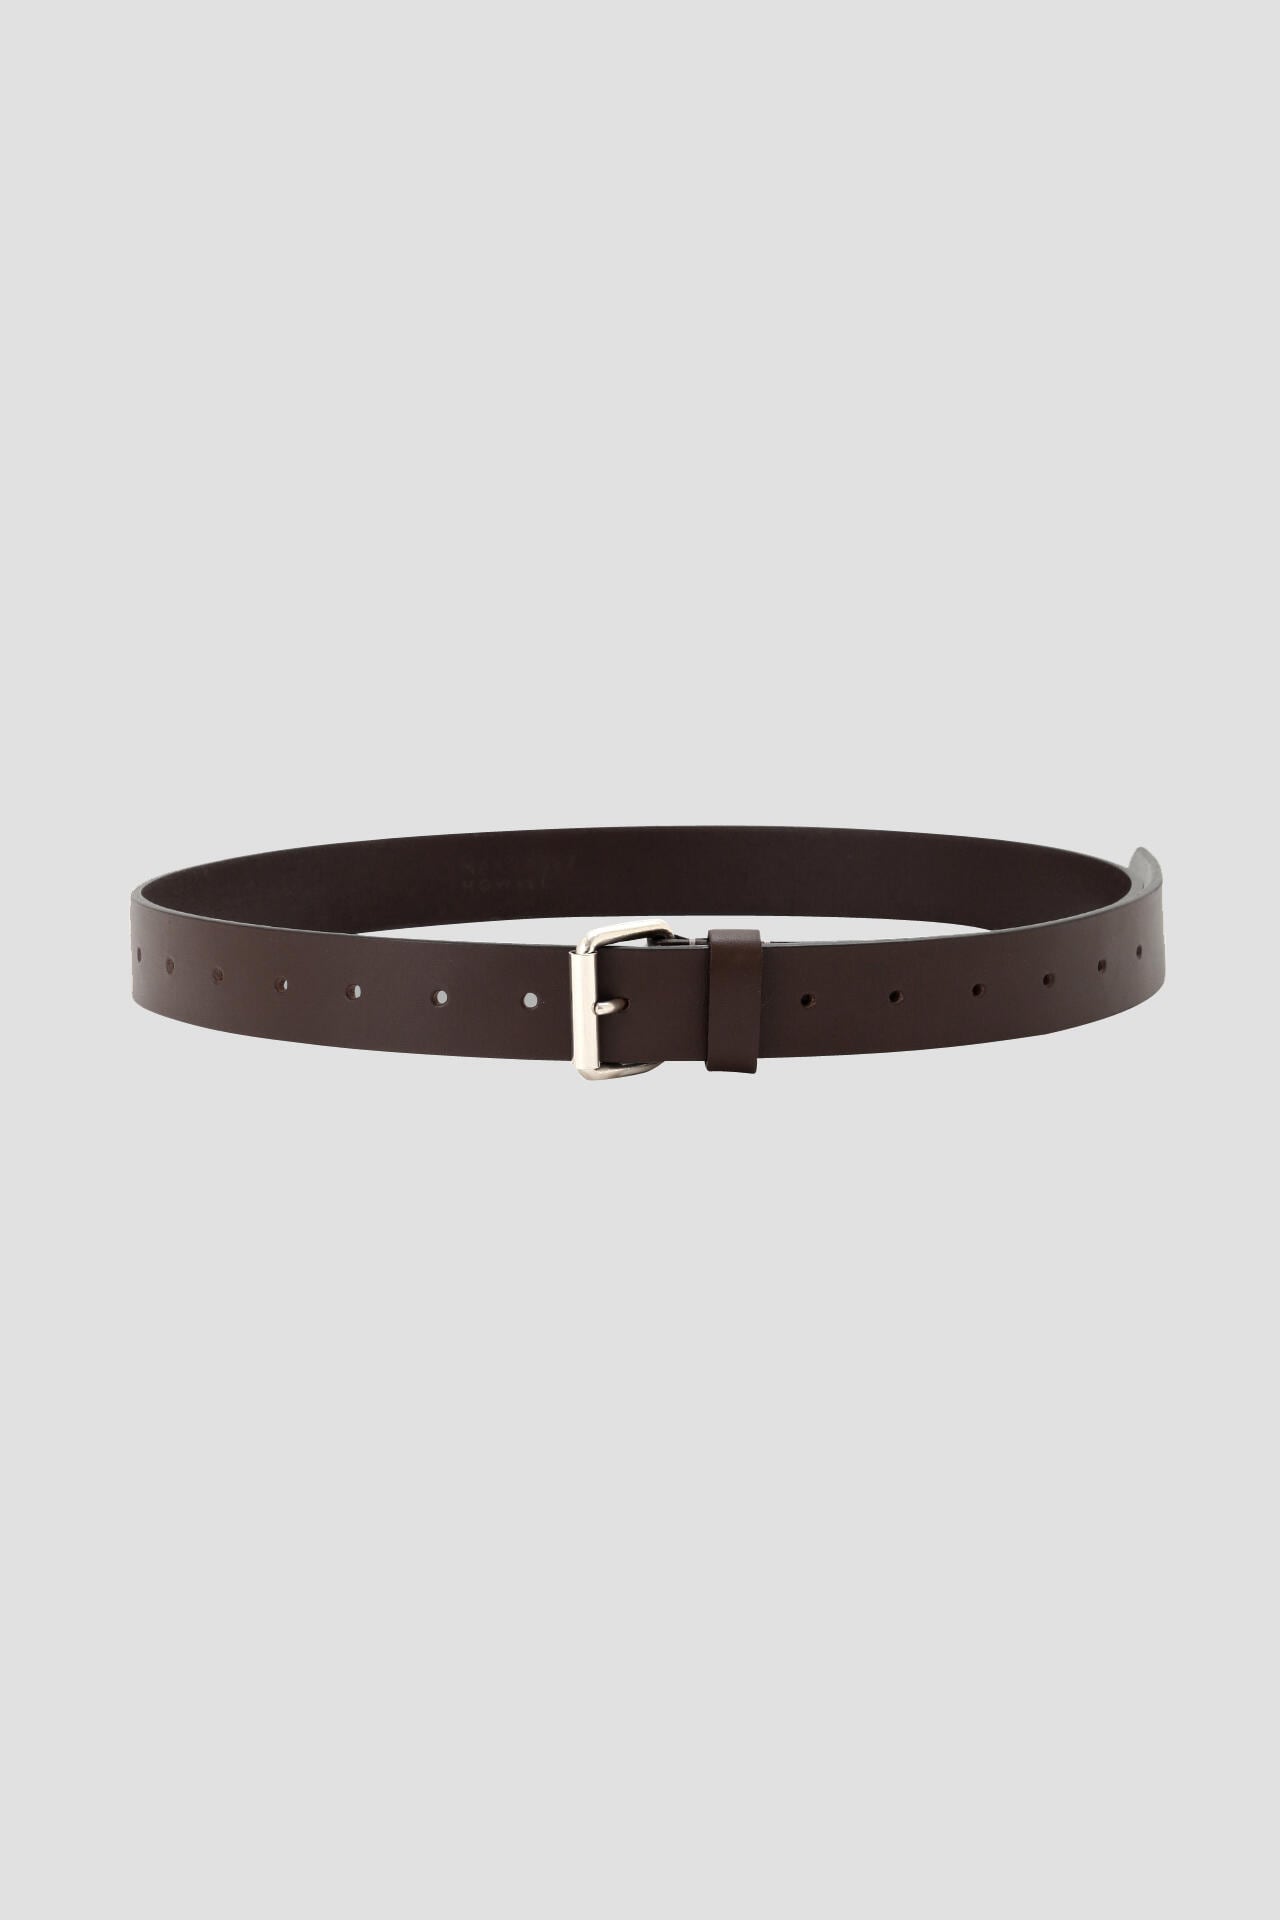 OILED LEATHER LONG BELT